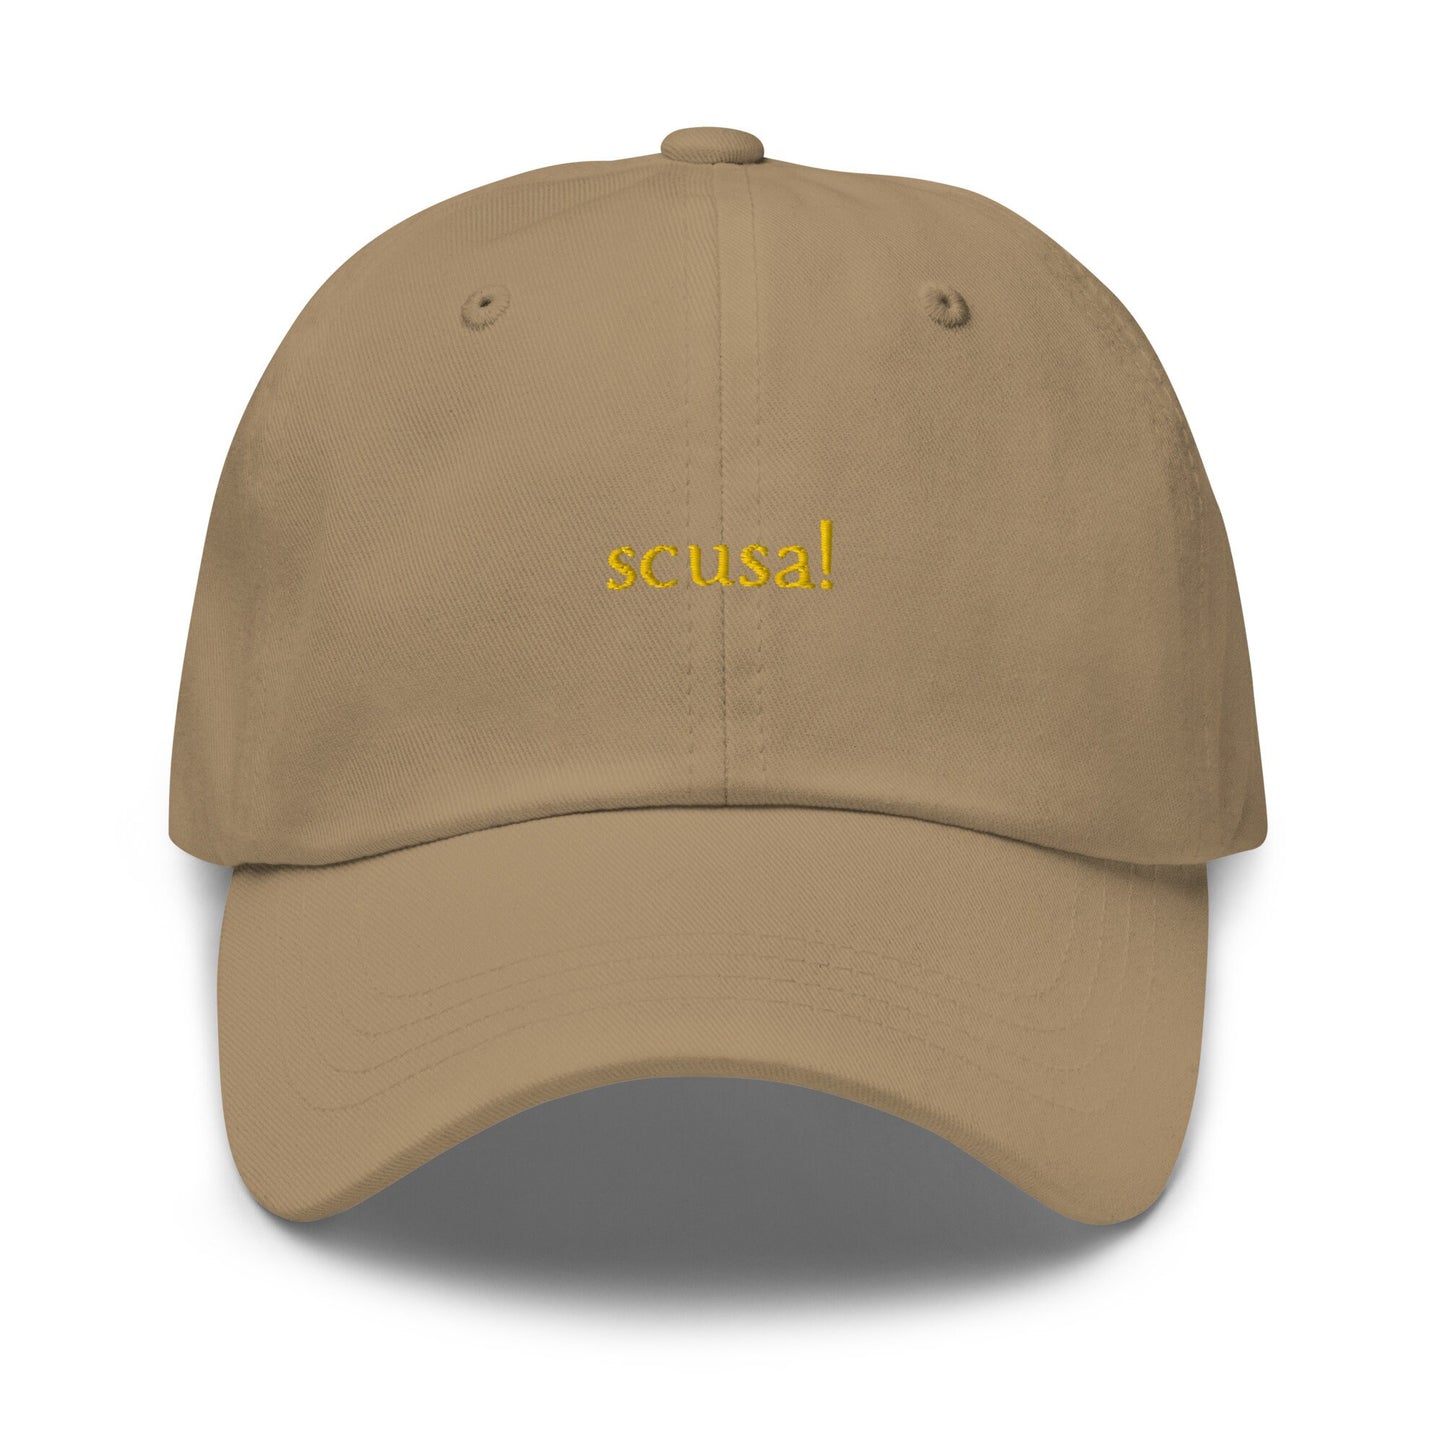 Scusa Dad Hat - Gift for Italian travel lovers - Cotton embroidered Cap